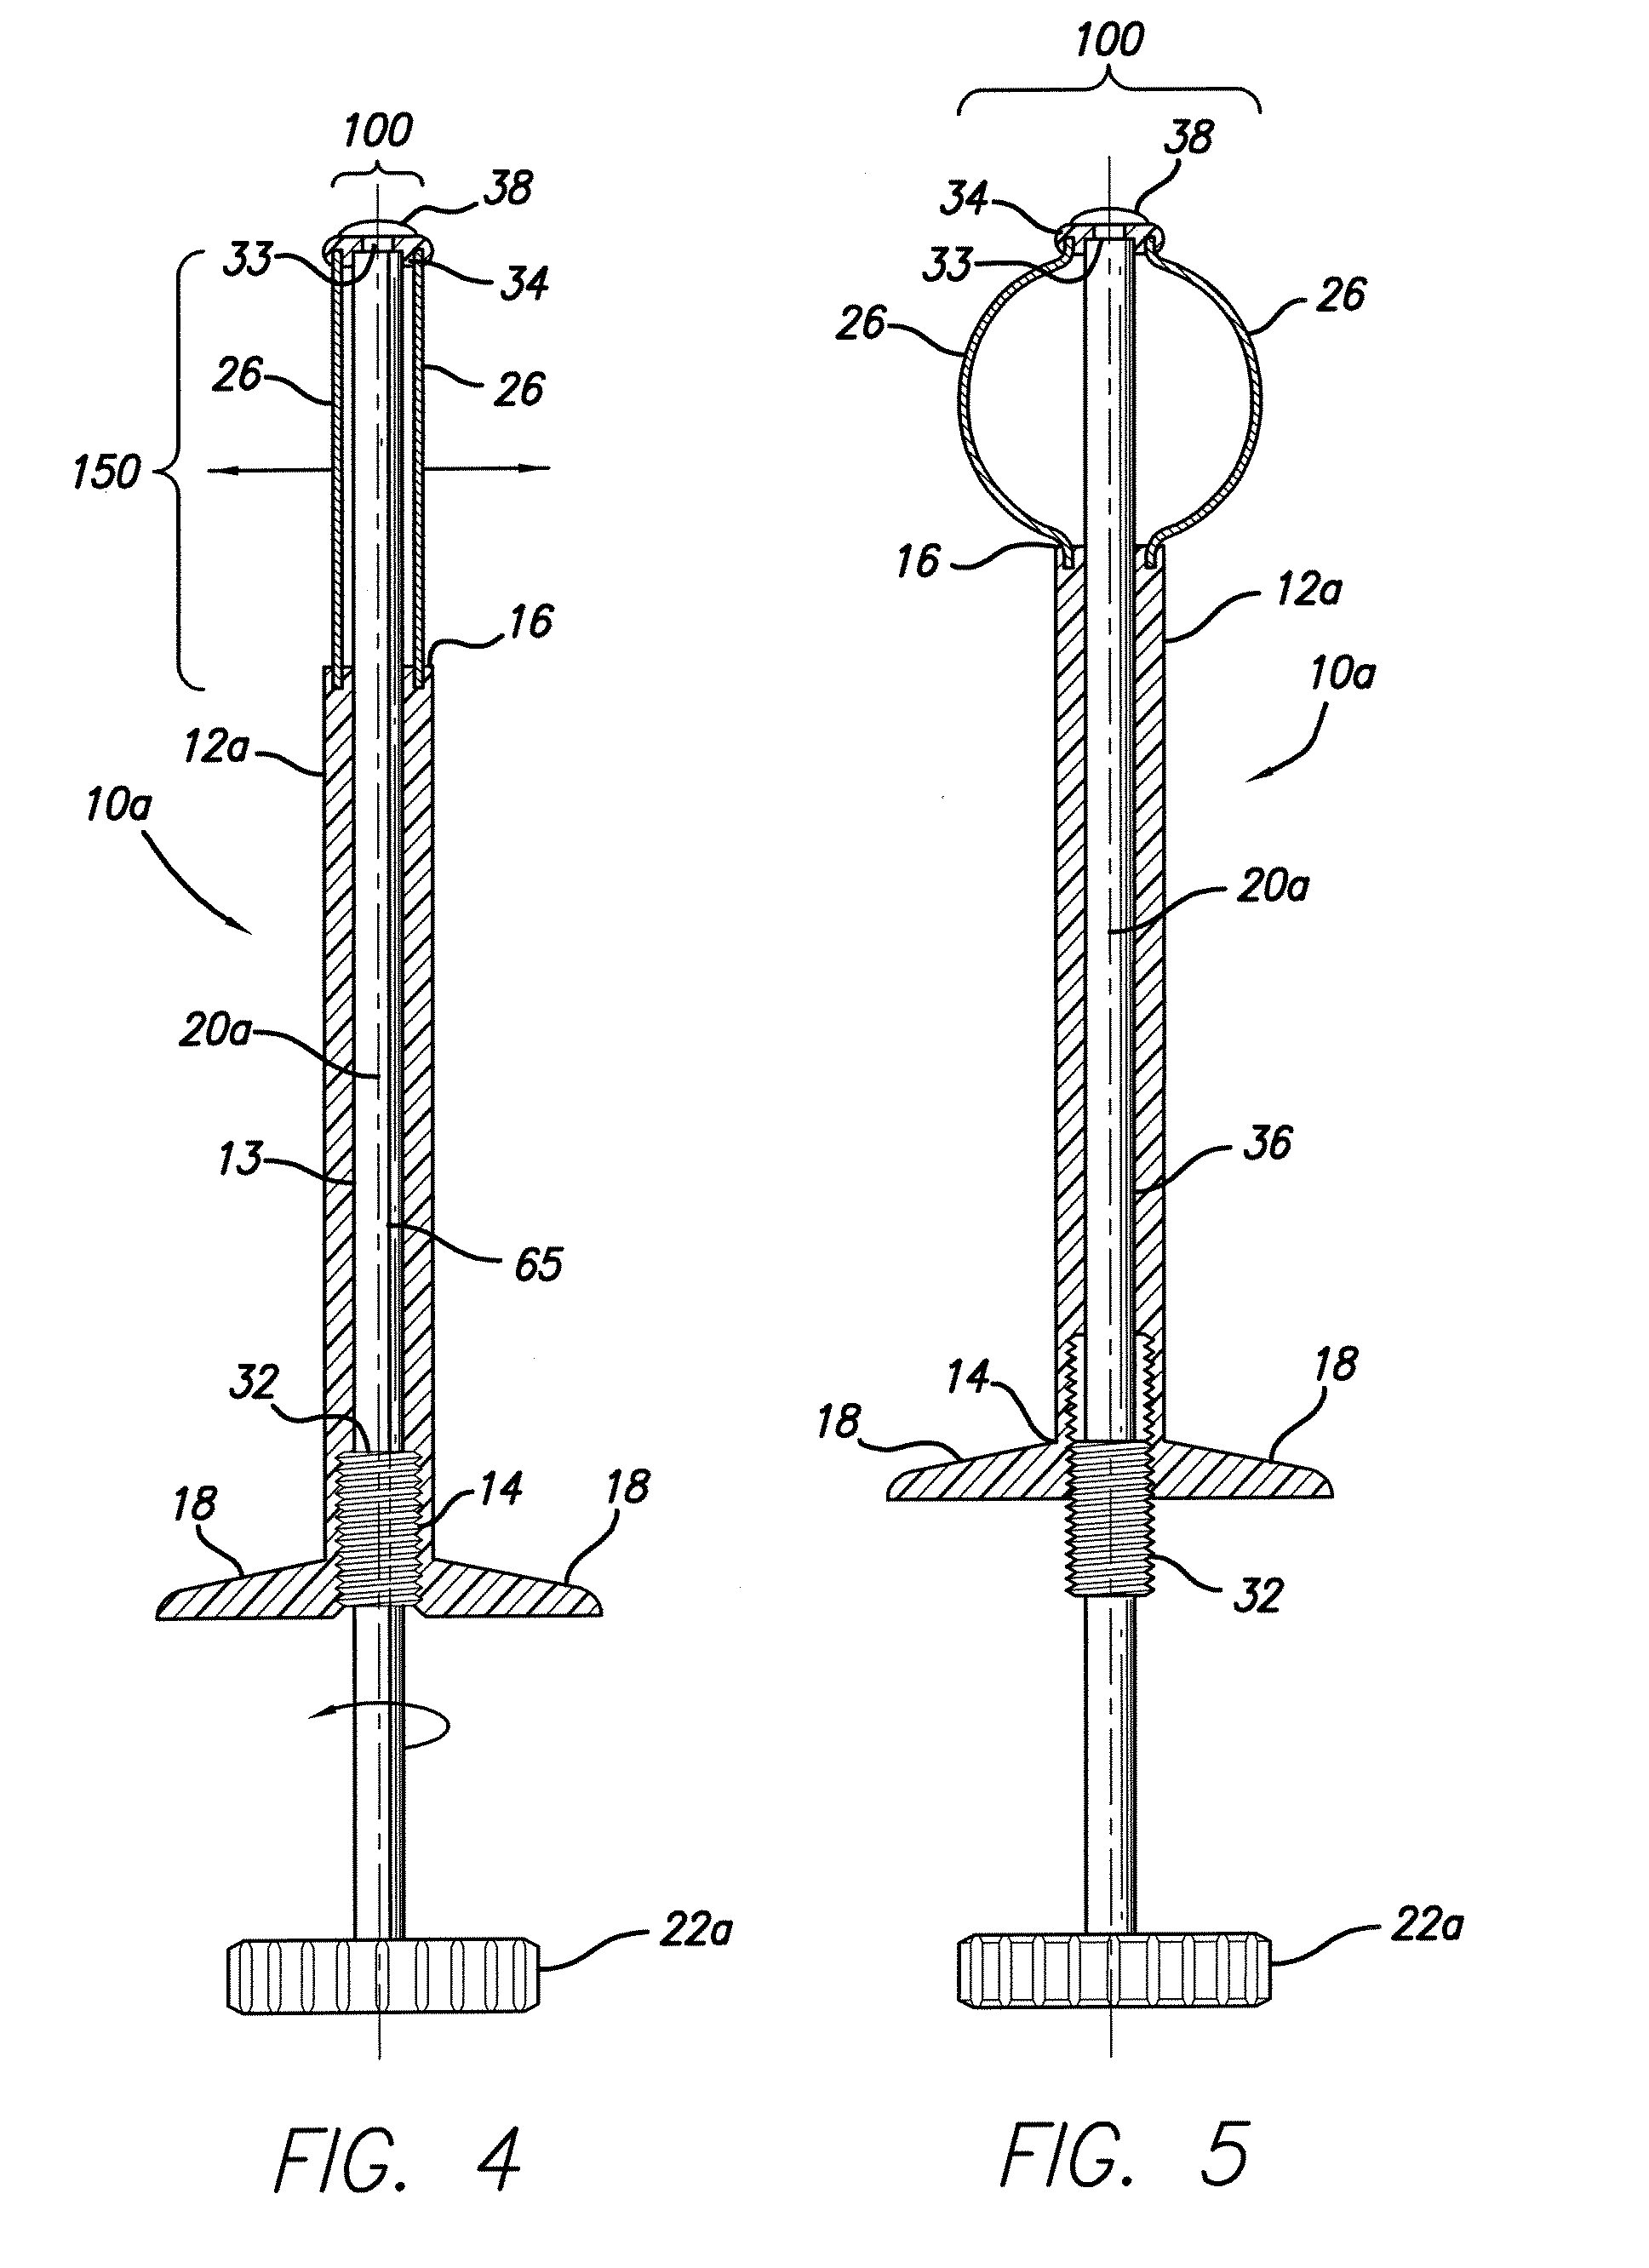 Expandable blade device for stabilizing long bone fractures